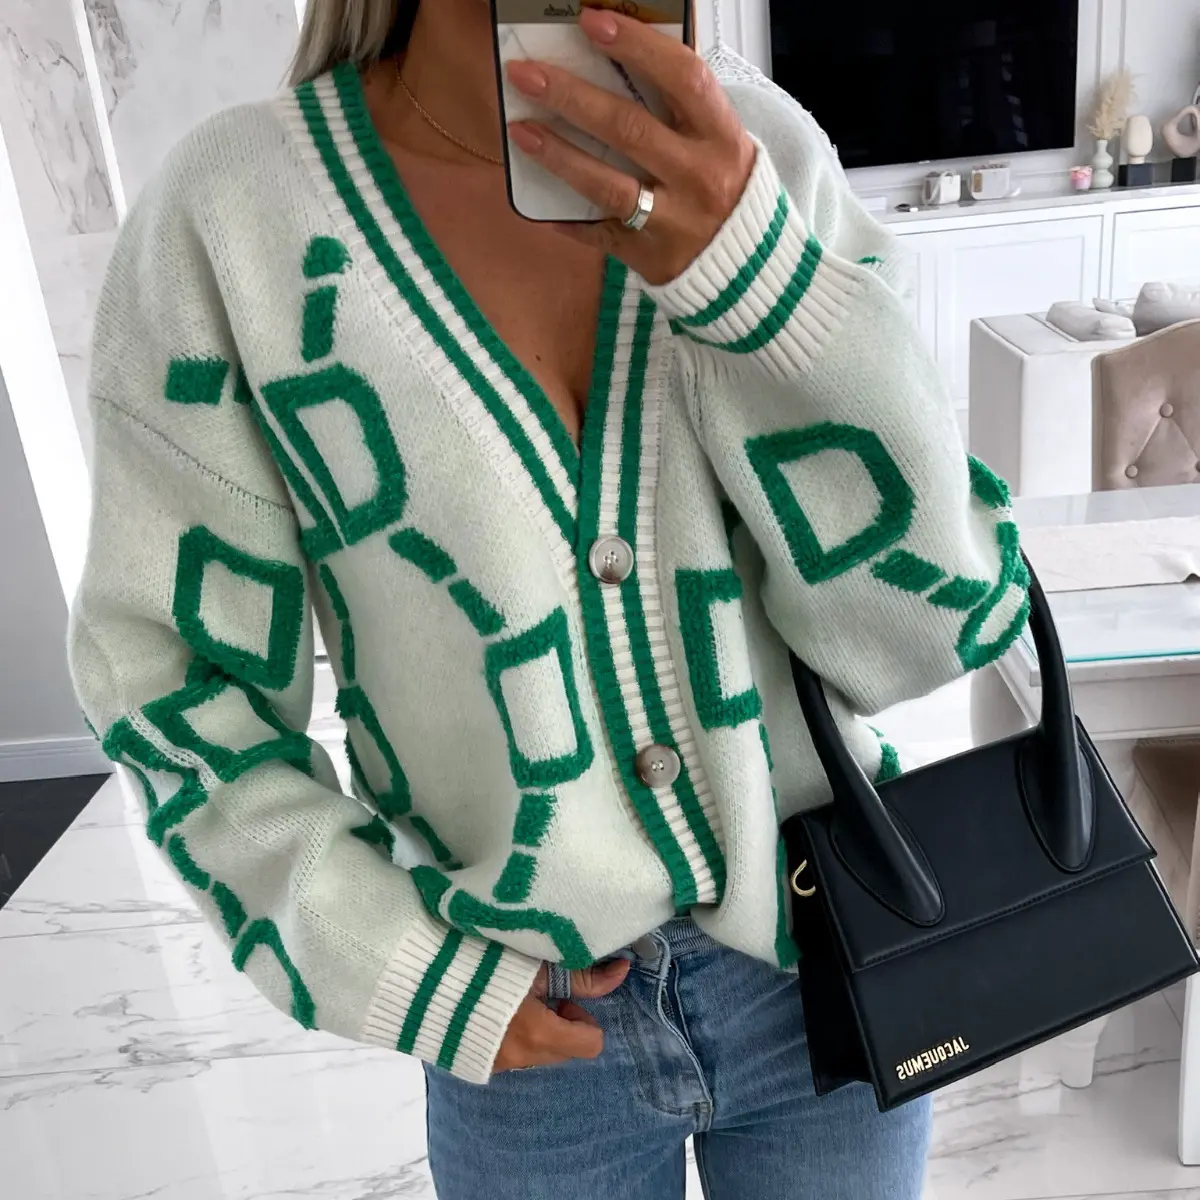 2021 V Neck Long Sleeve Cardigan Women Green Autumn Winter Knitted Sweater Loose Casual Fashion Tops Vintage Women's Sweaters